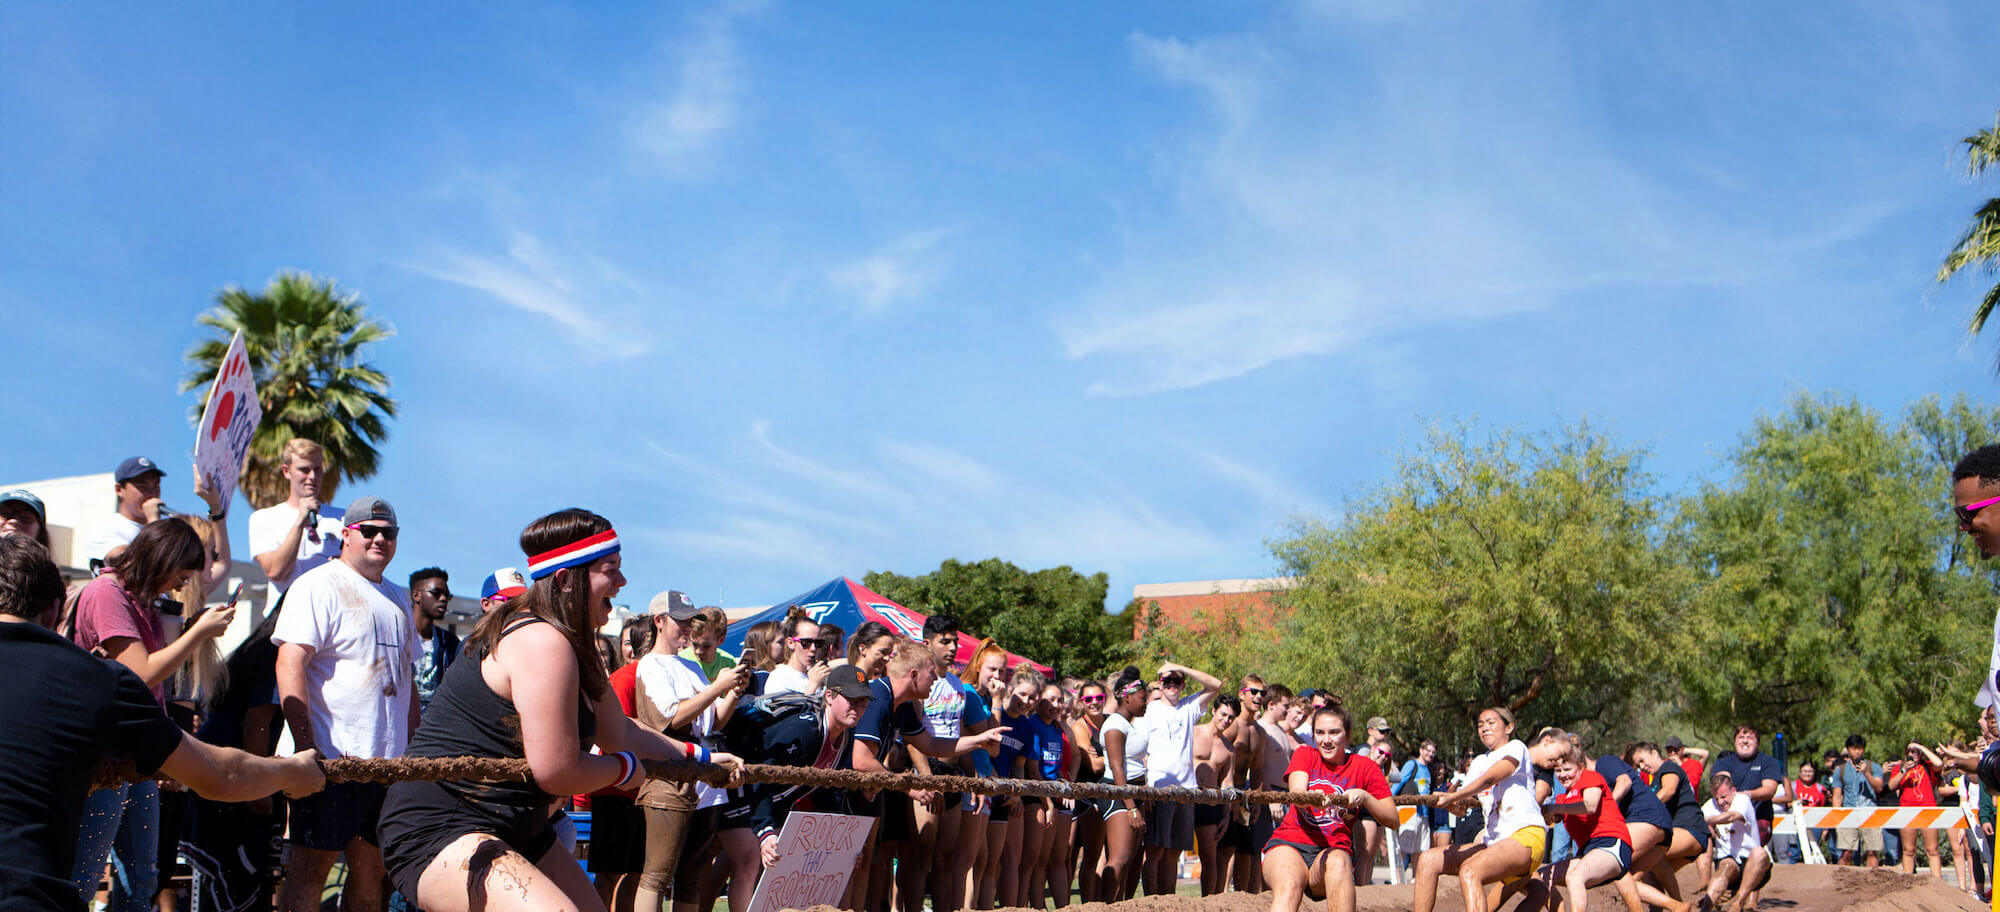 Teams of students playing tug-of-war over mud as part of a tradition at the University of Arizona.